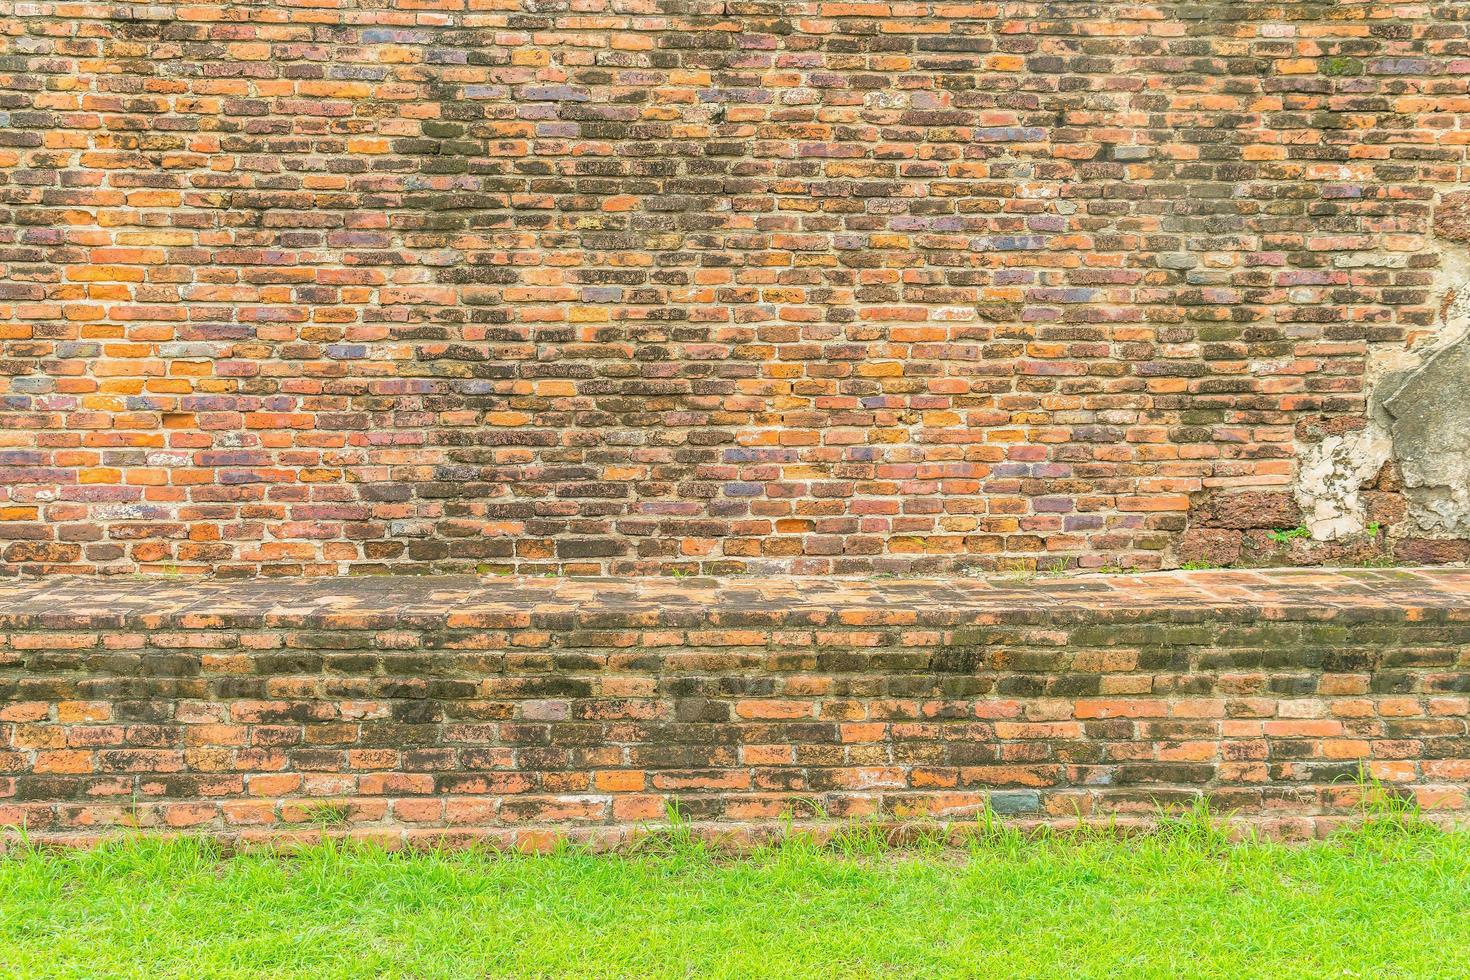 Empty brick wall texture for background photo